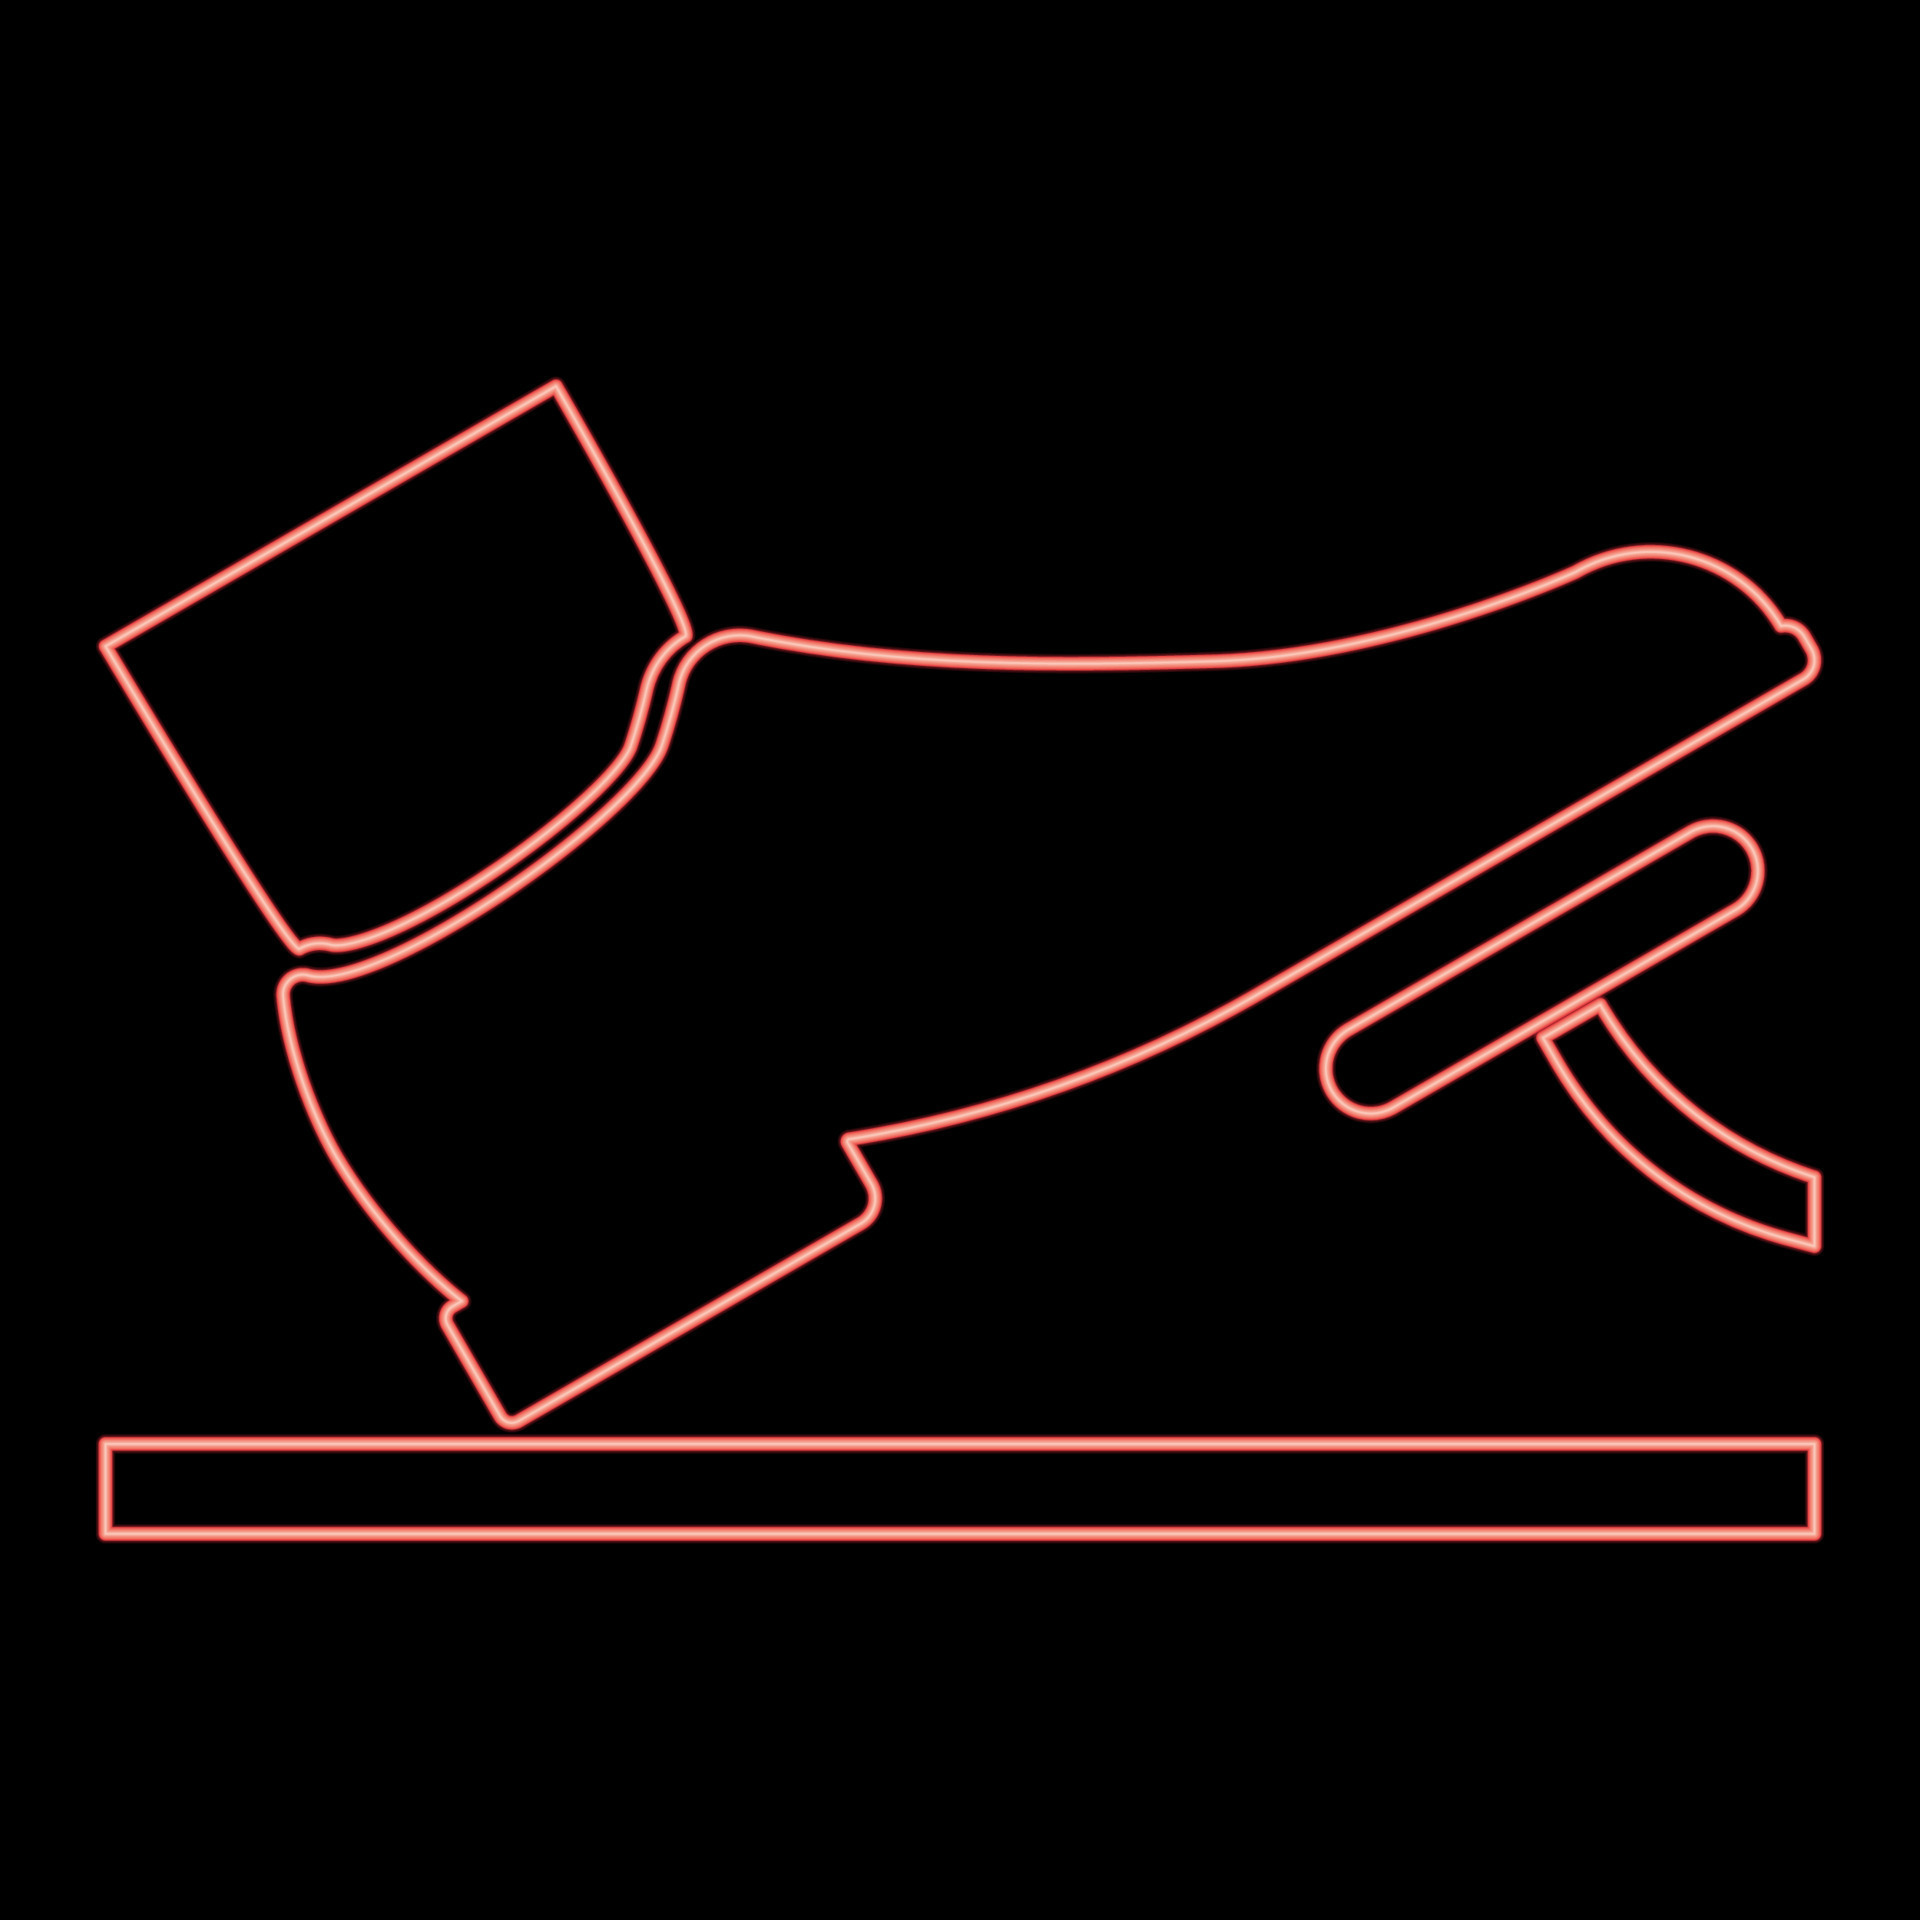 https://static.vecteezy.com/system/resources/previews/015/323/357/original/neon-foot-pushing-the-pedal-gas-pedal-brake-pedal-auto-service-concept-icon-red-color-illustration-image-flat-style-vector.jpg